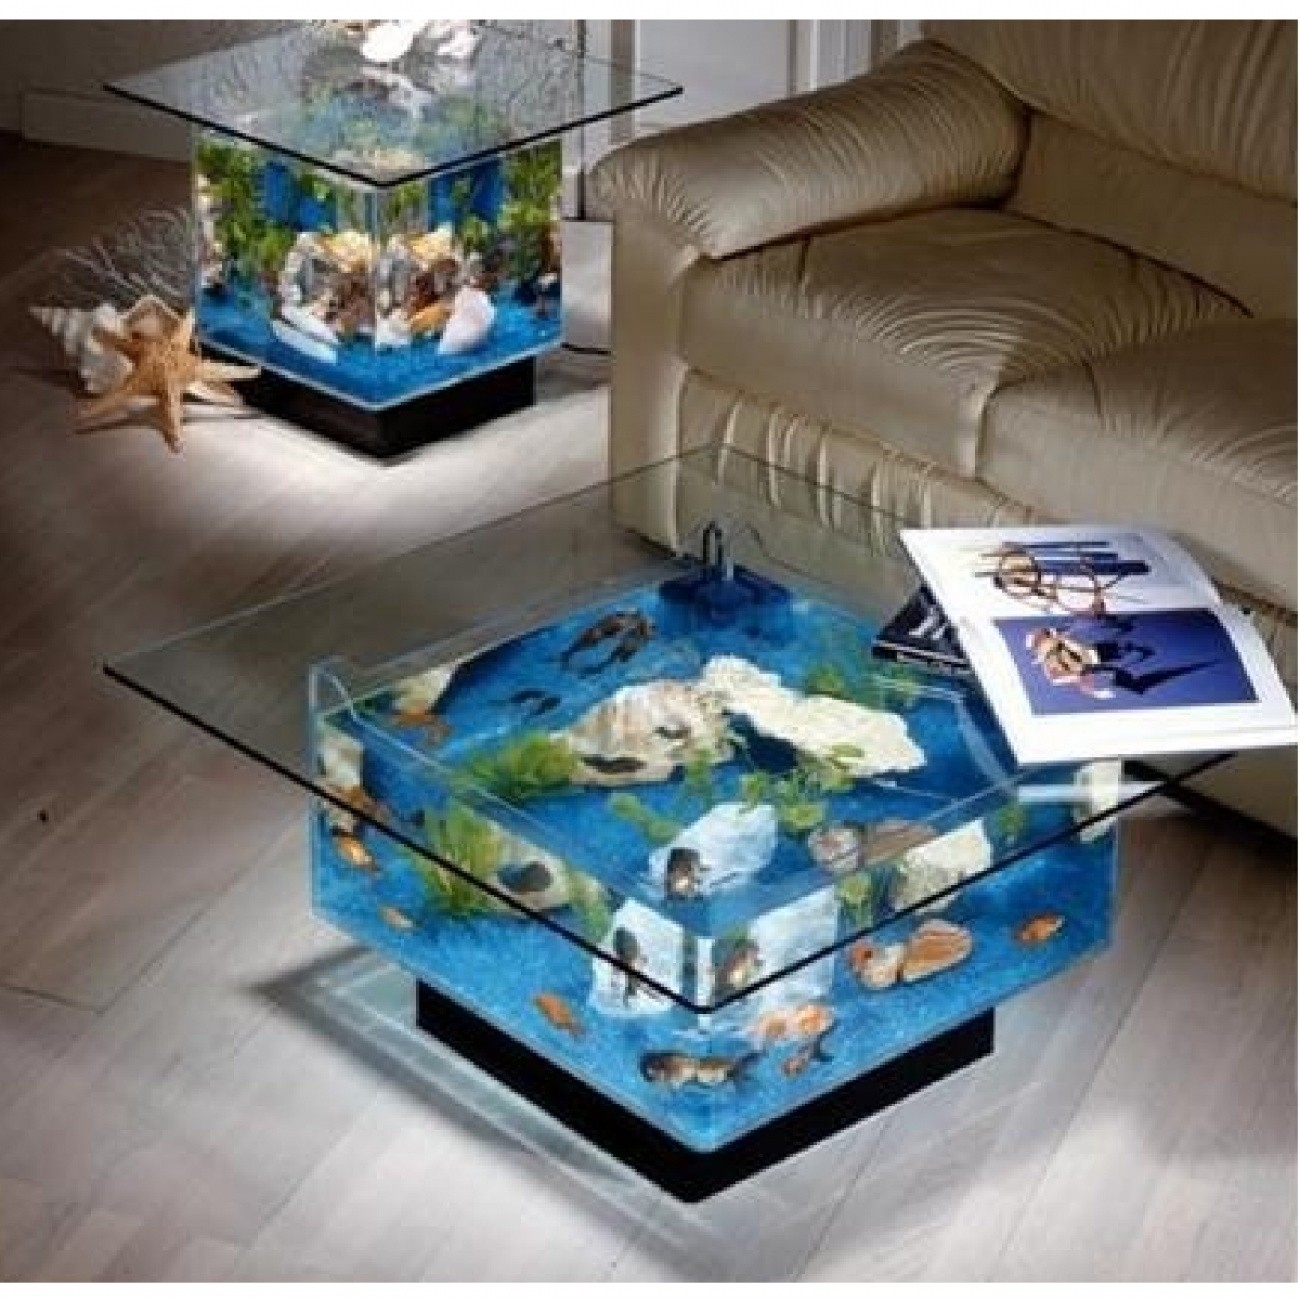 Unique End Tables And Coffee Tables Ideas On Foter